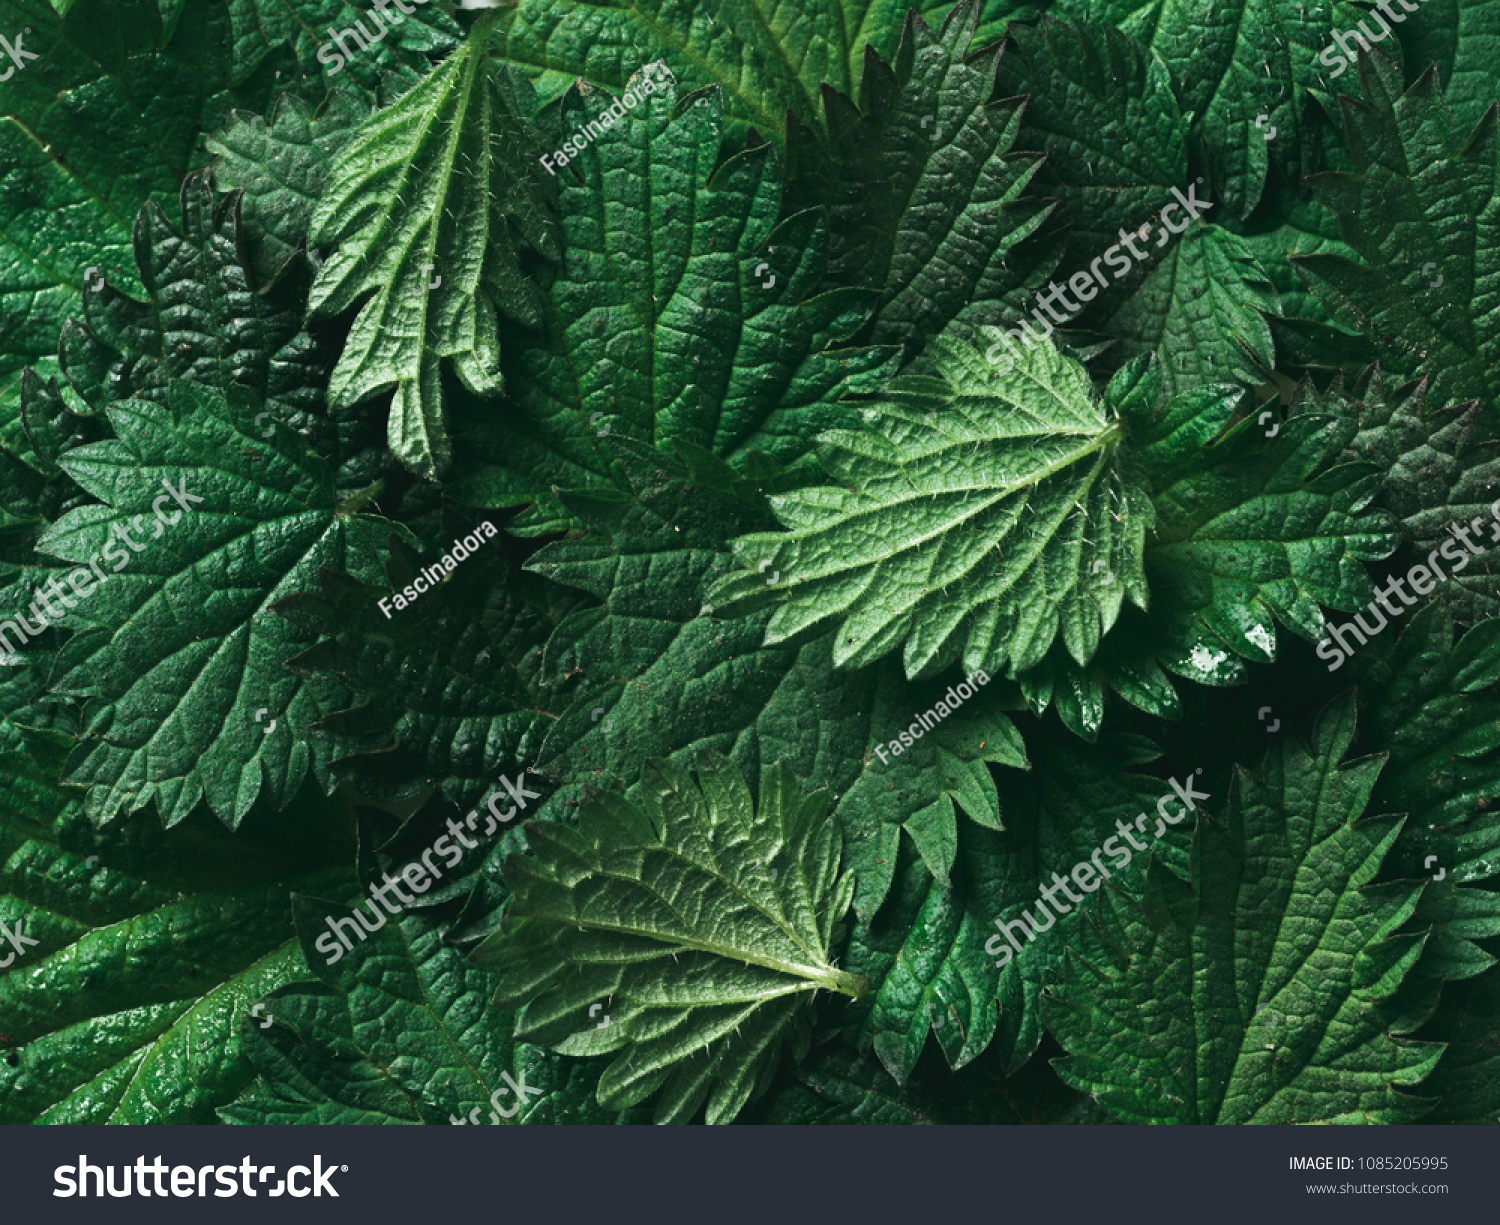 stinging nettle leaves as background. Beautiful texture of nettle. Top view. Copy space. Can use as banner #1085205995